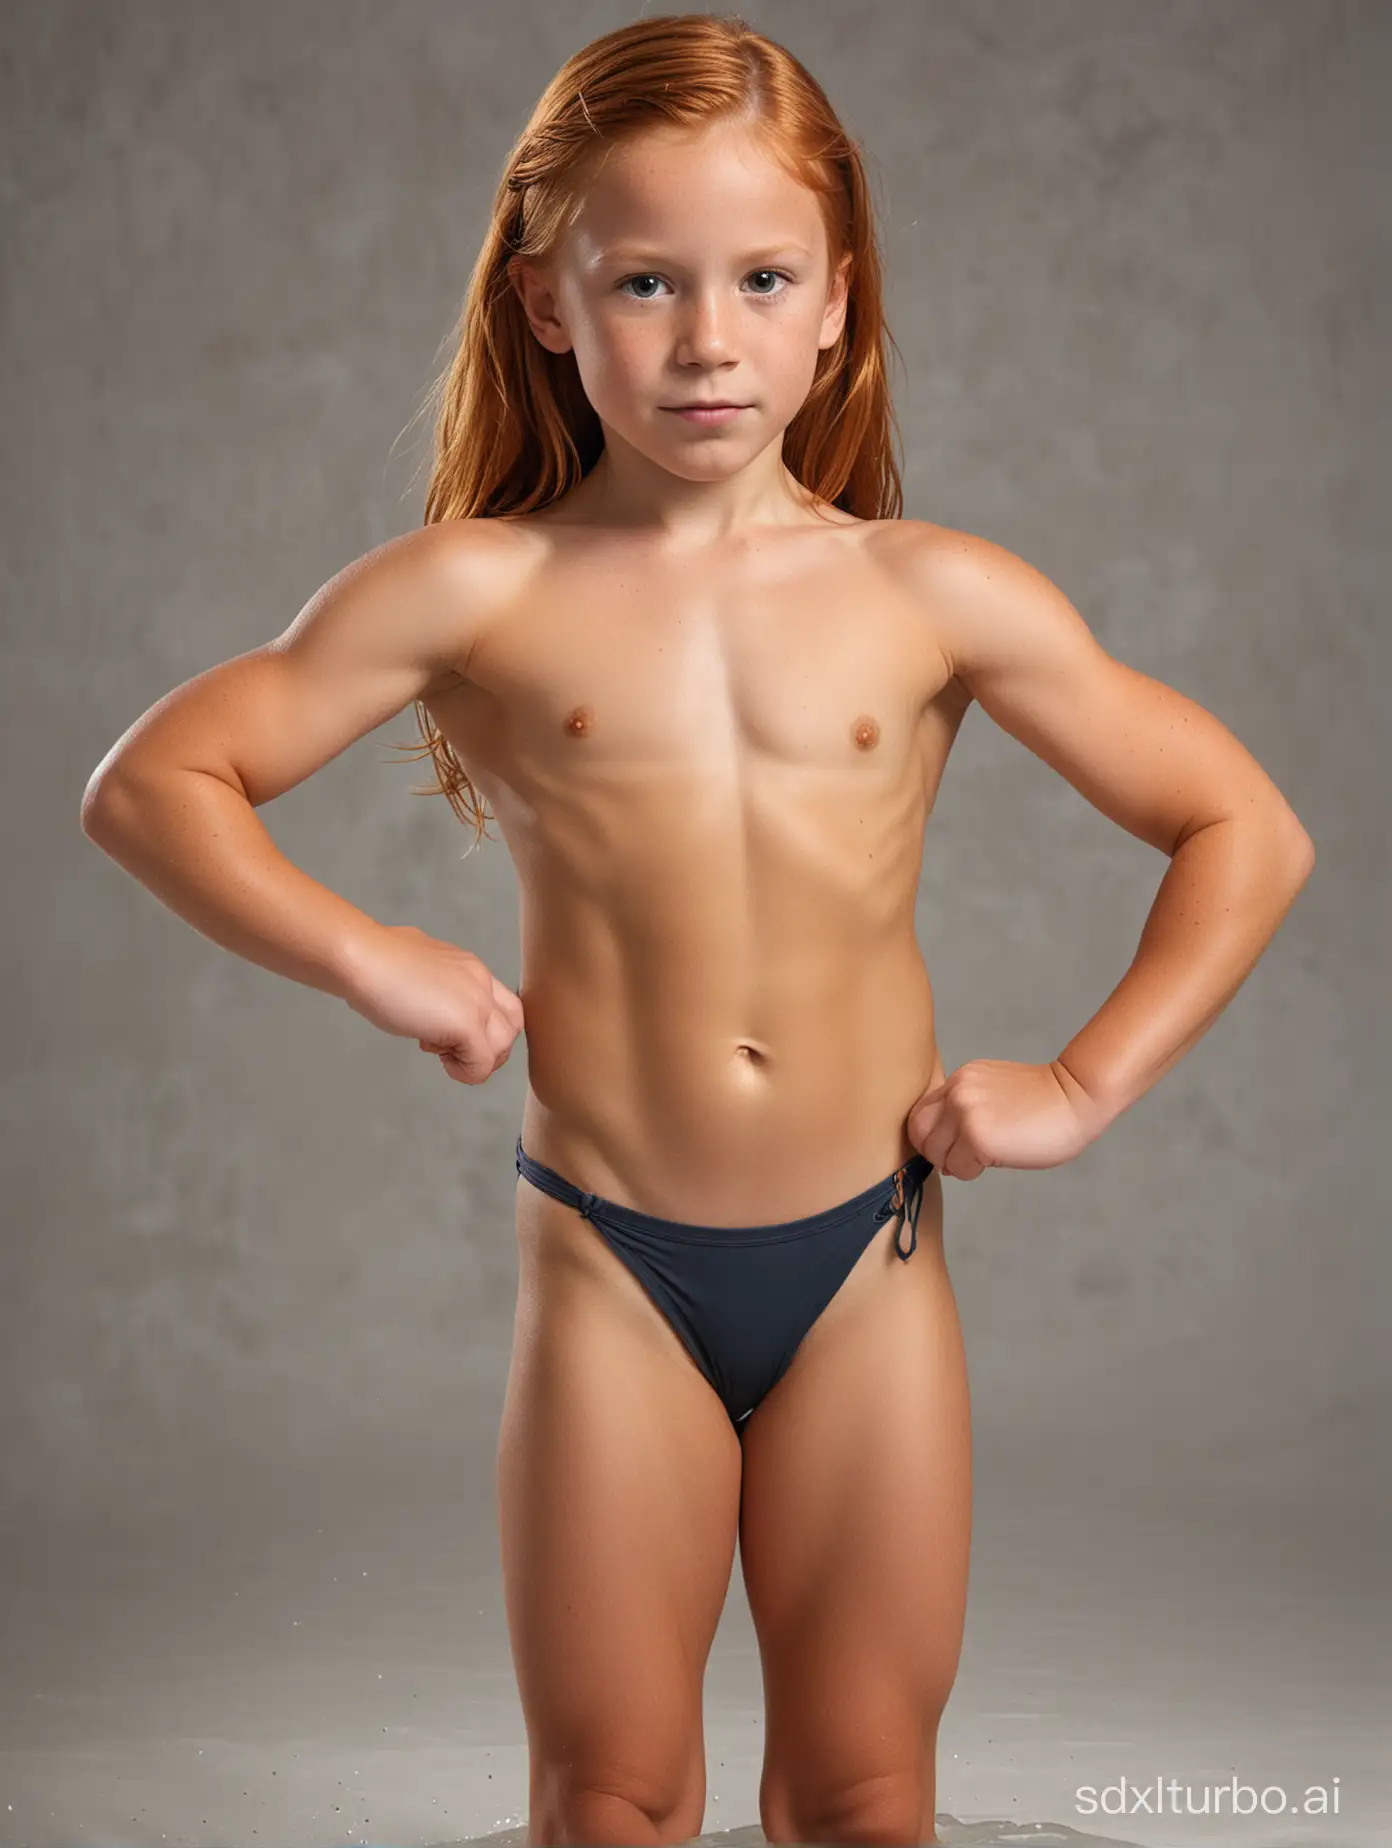 Muscular-7YearOld-Ginger-Girl-in-Vibrant-Bathing-Suit